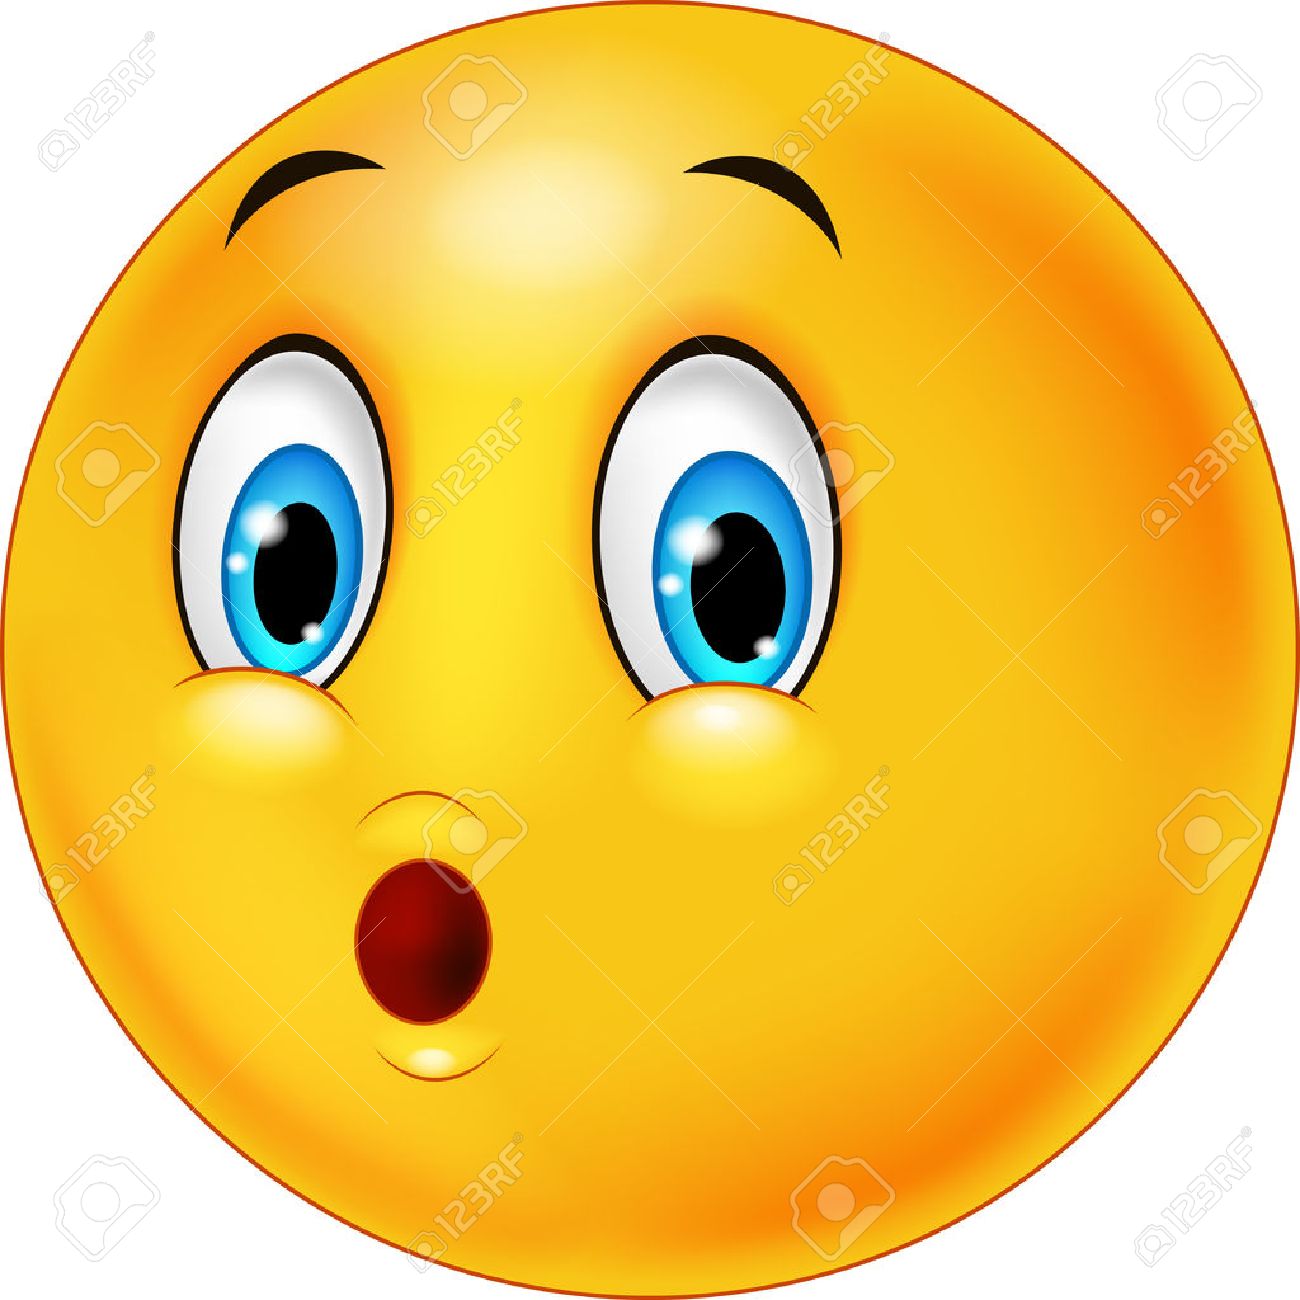 Surprised smiley clipart